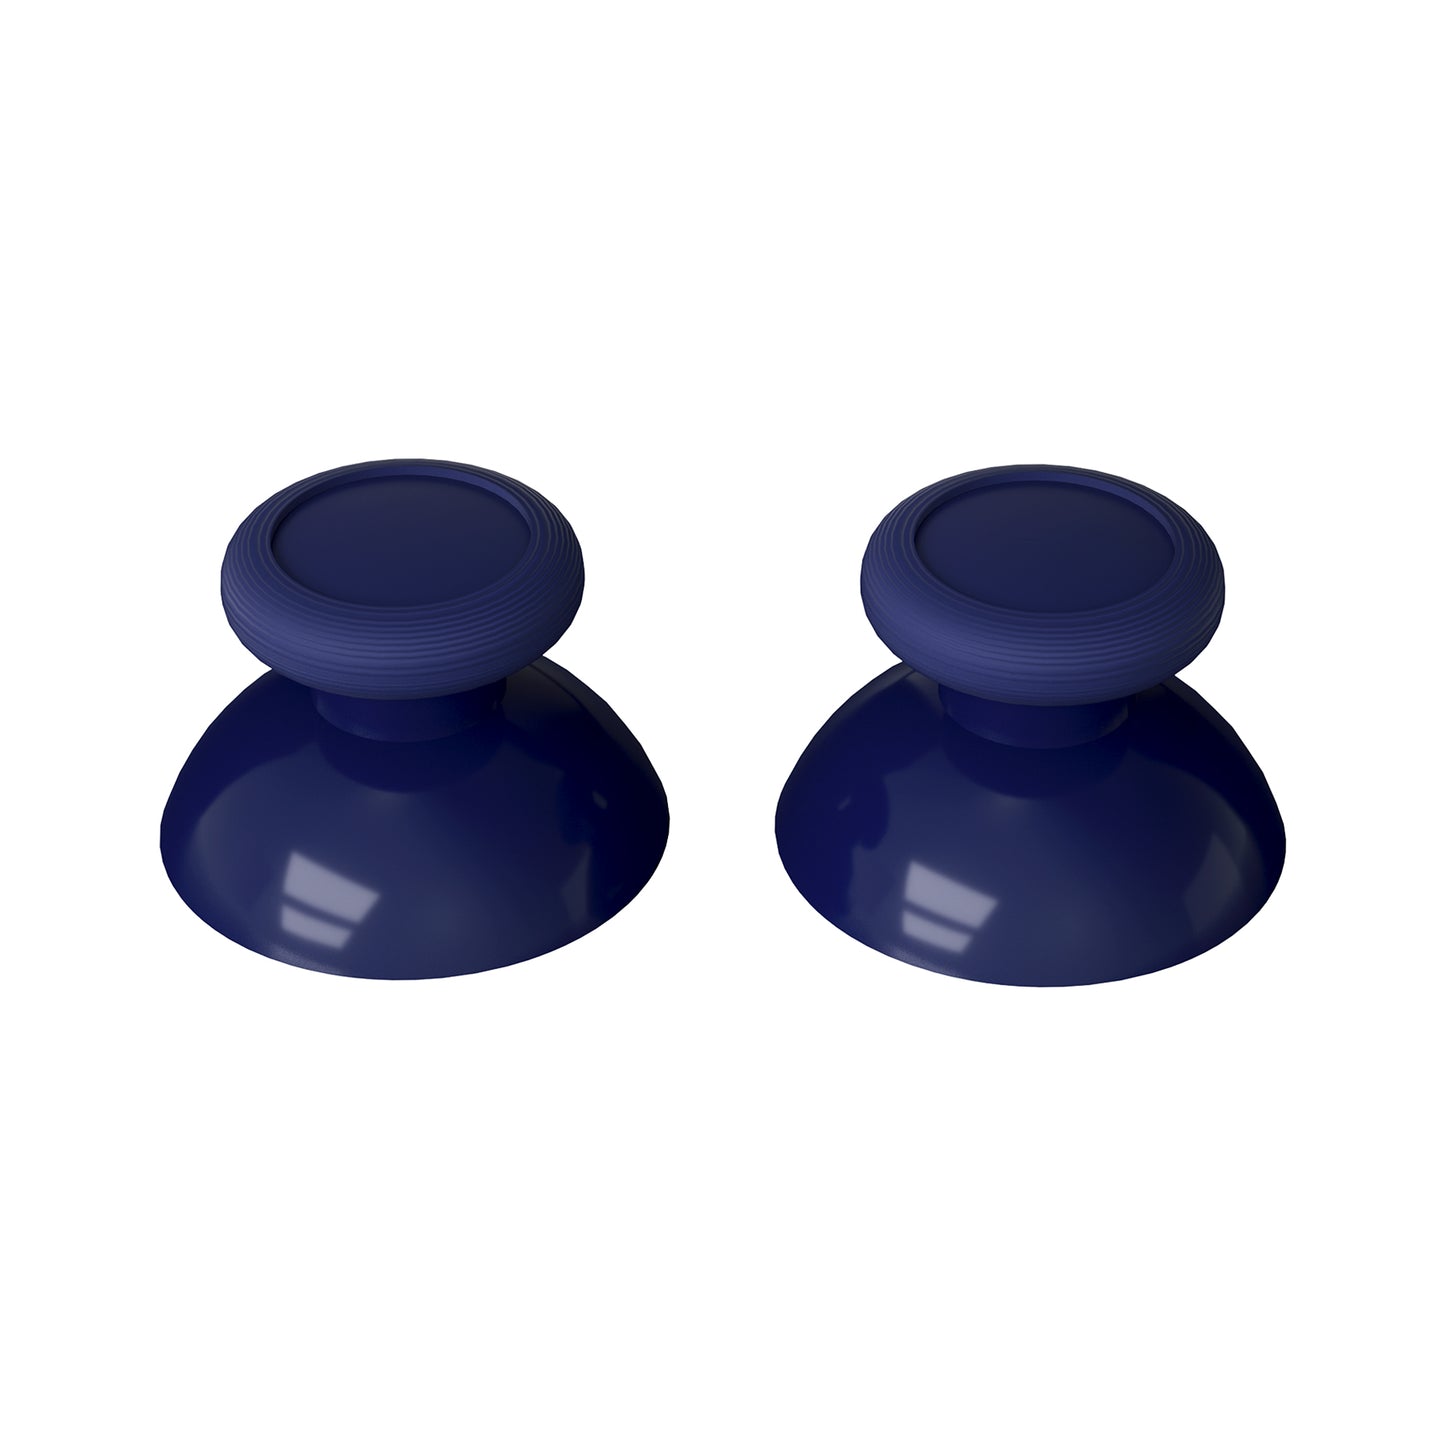 eXtremeRate Retail Midnight Blue Replacement 3D Joystick Thumbsticks, Analog Thumb Sticks with Phillips Screwdriver for Nintendo Switch Pro Controller - KRM533